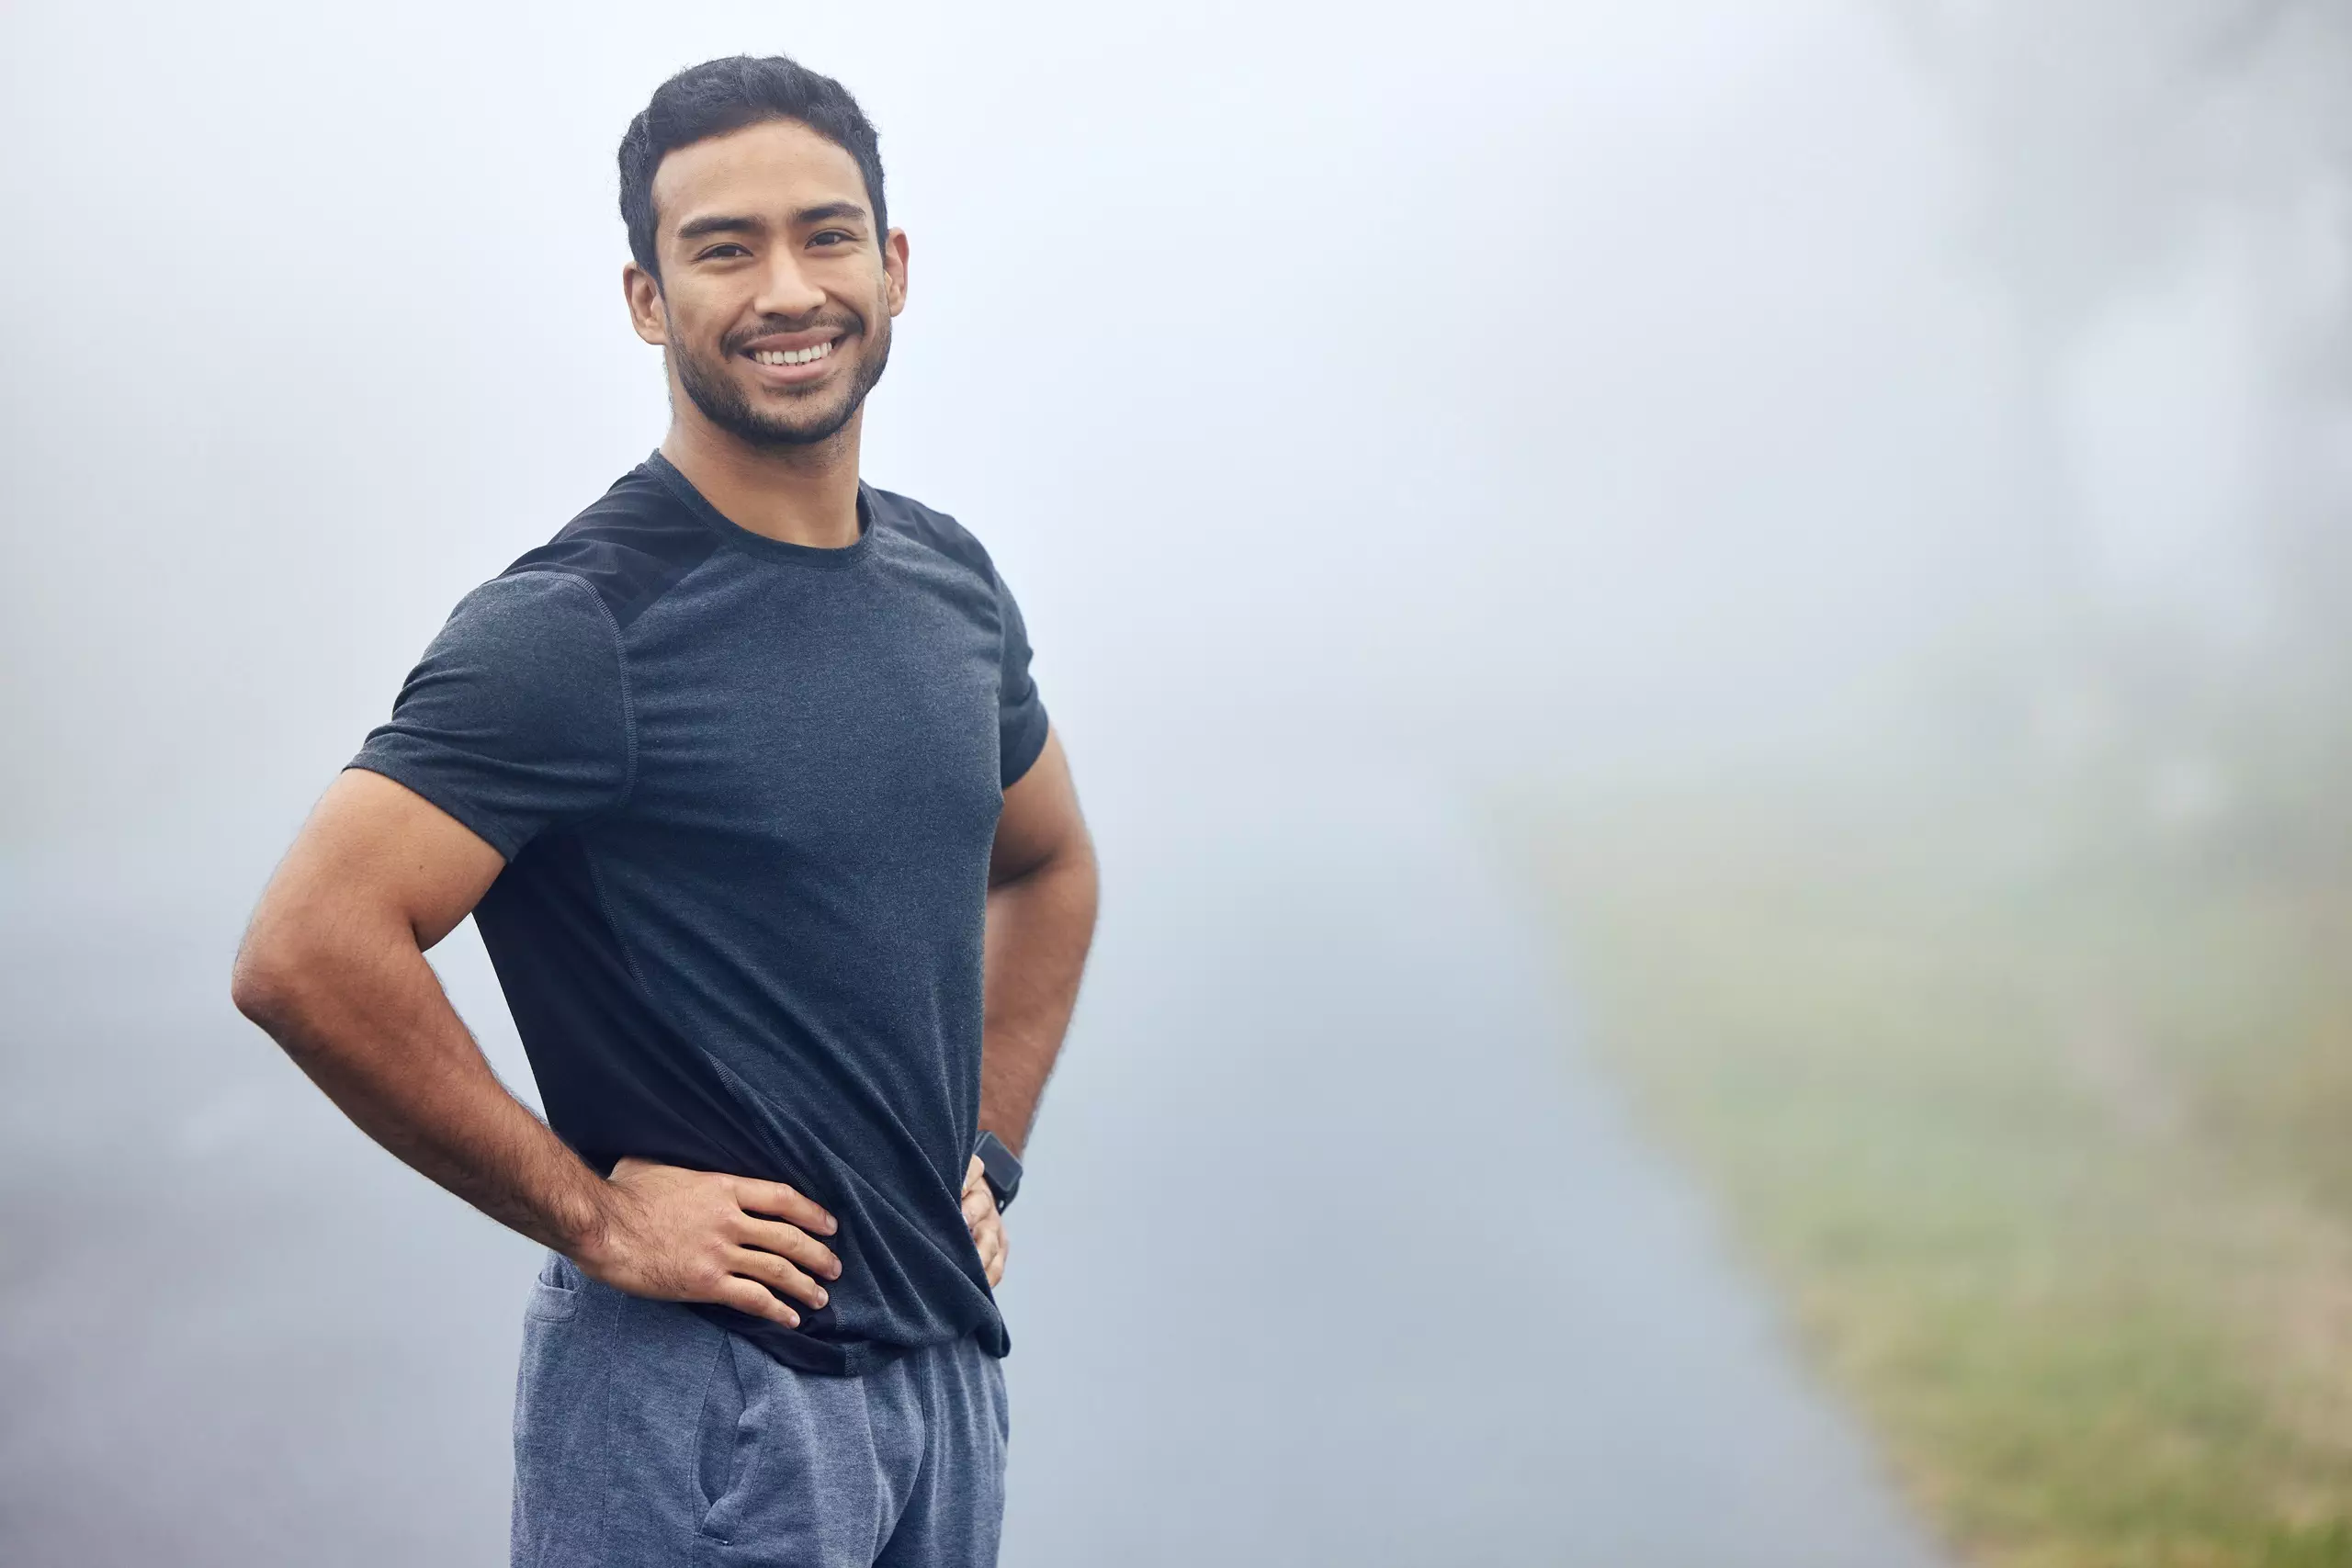 Healthy Man smiling during foggy outdoor workout.